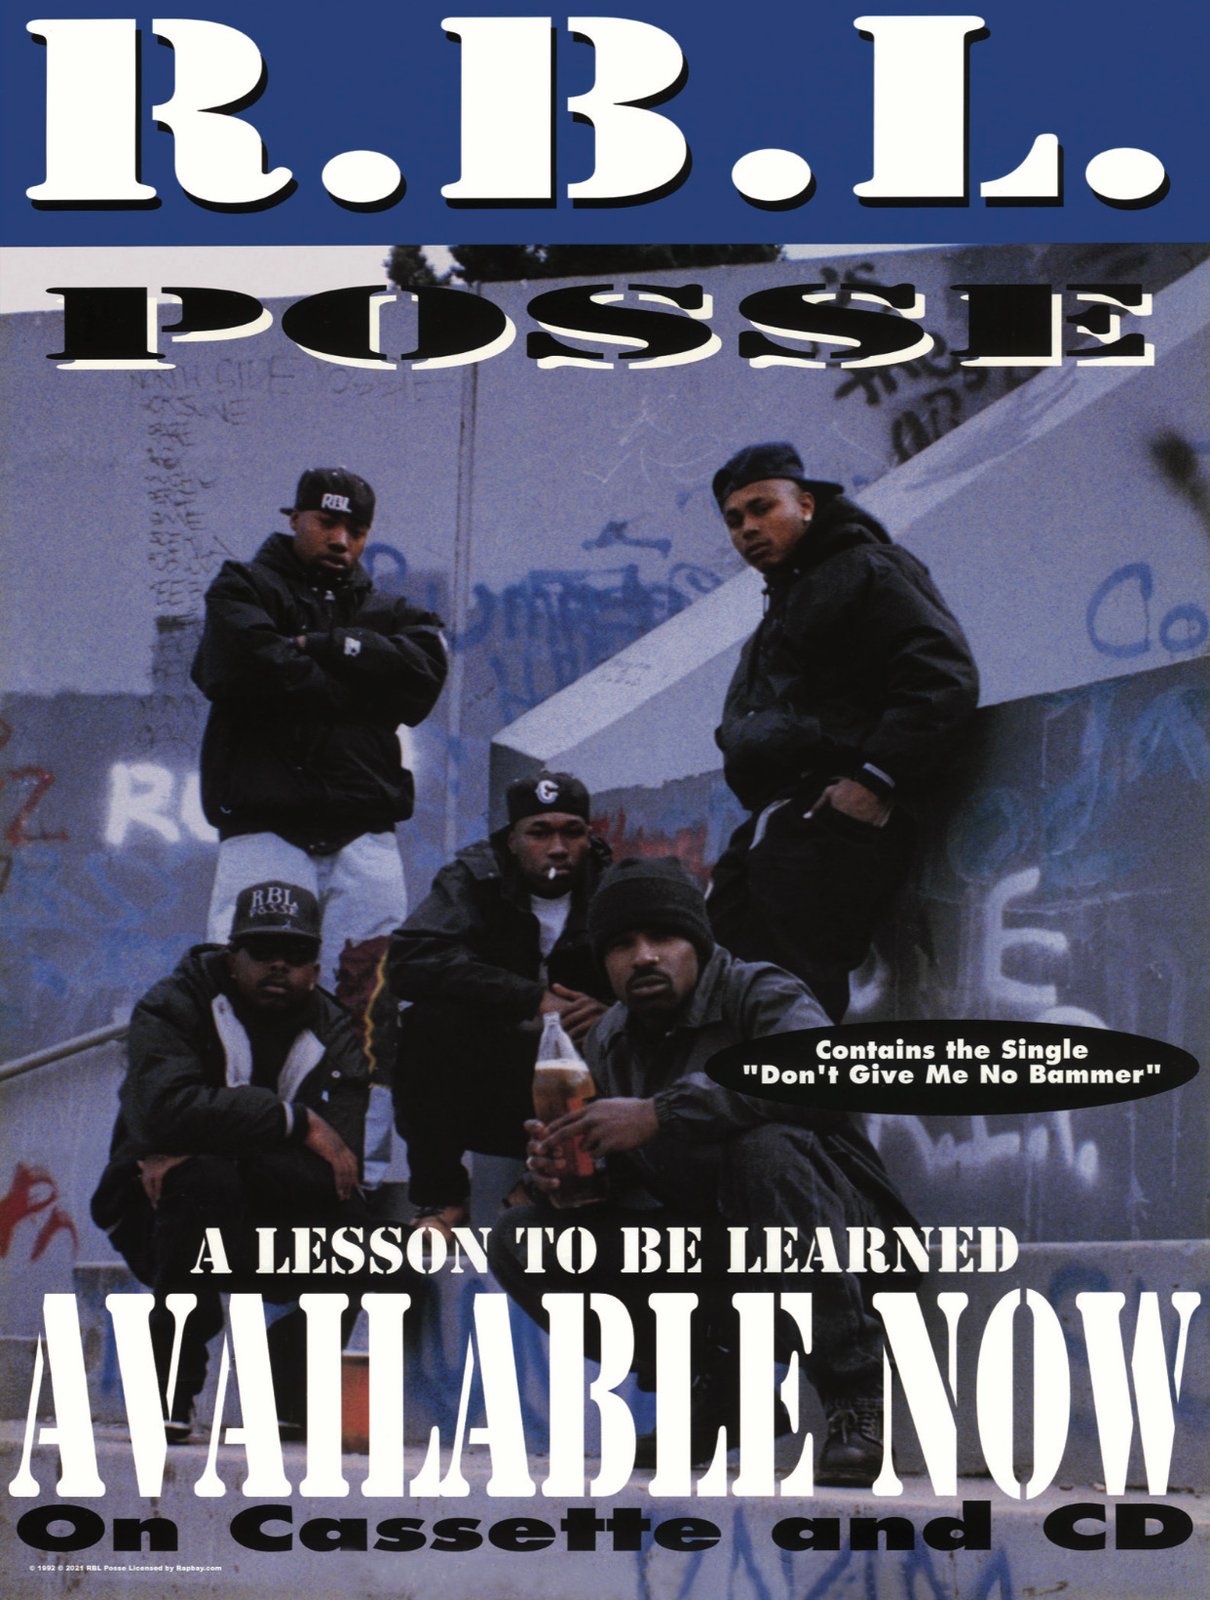 RBL Posse “A Lesson To Be Learned” 18 x 24 Poster / Ruthless By Law